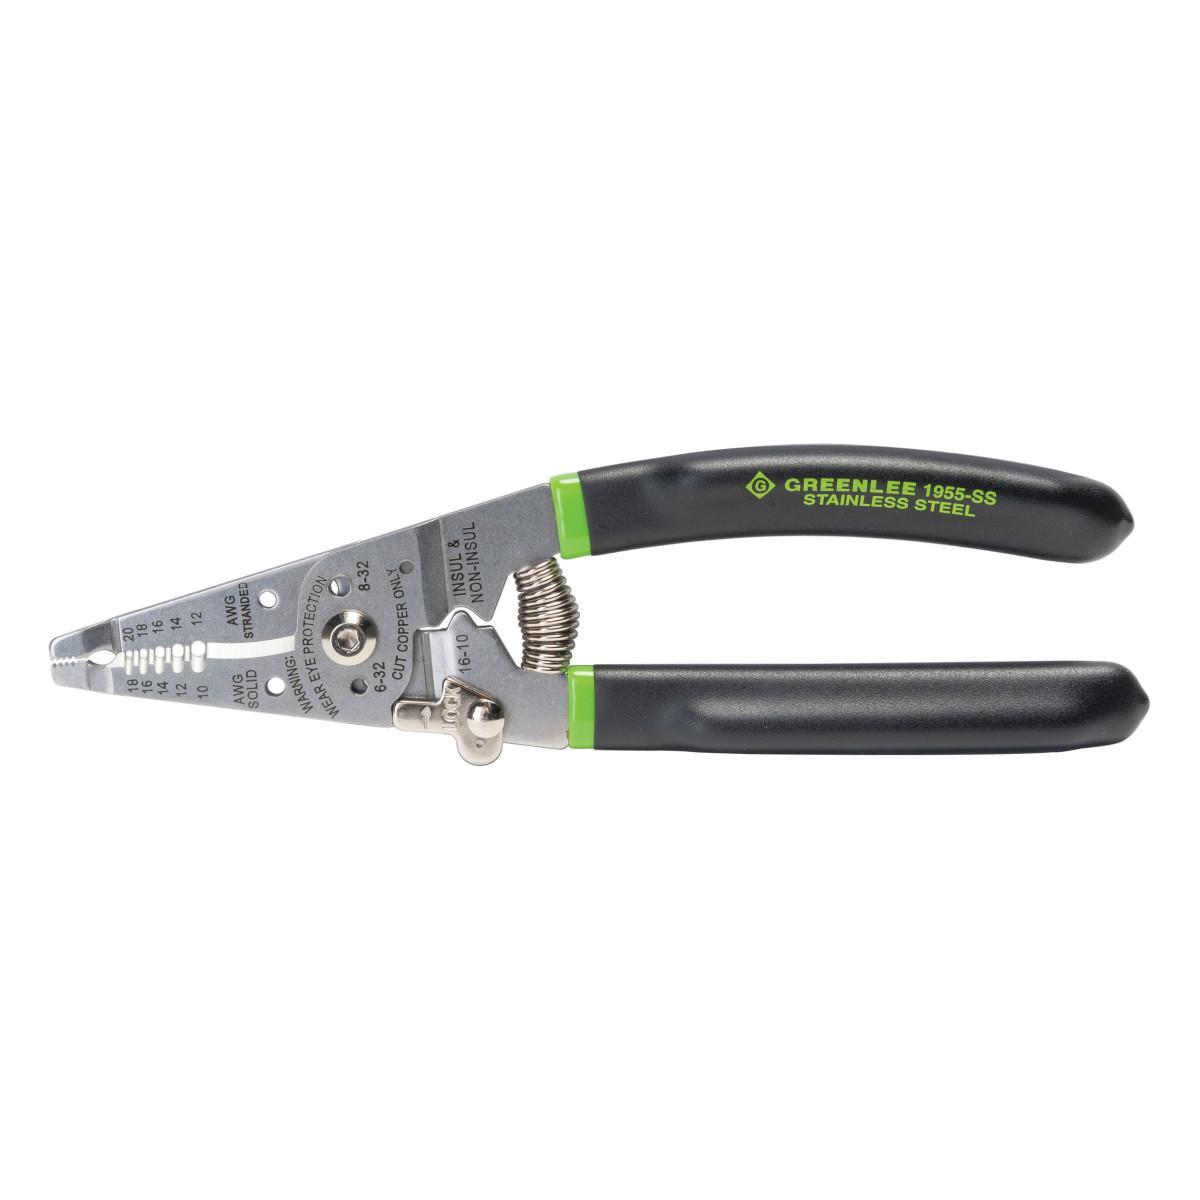 Greenlee® 1903 Lightweight Cable Stripper, 0.18 to 1.57 in, 7 in OAL, 8 AWG to 1250 kcmil Shearing